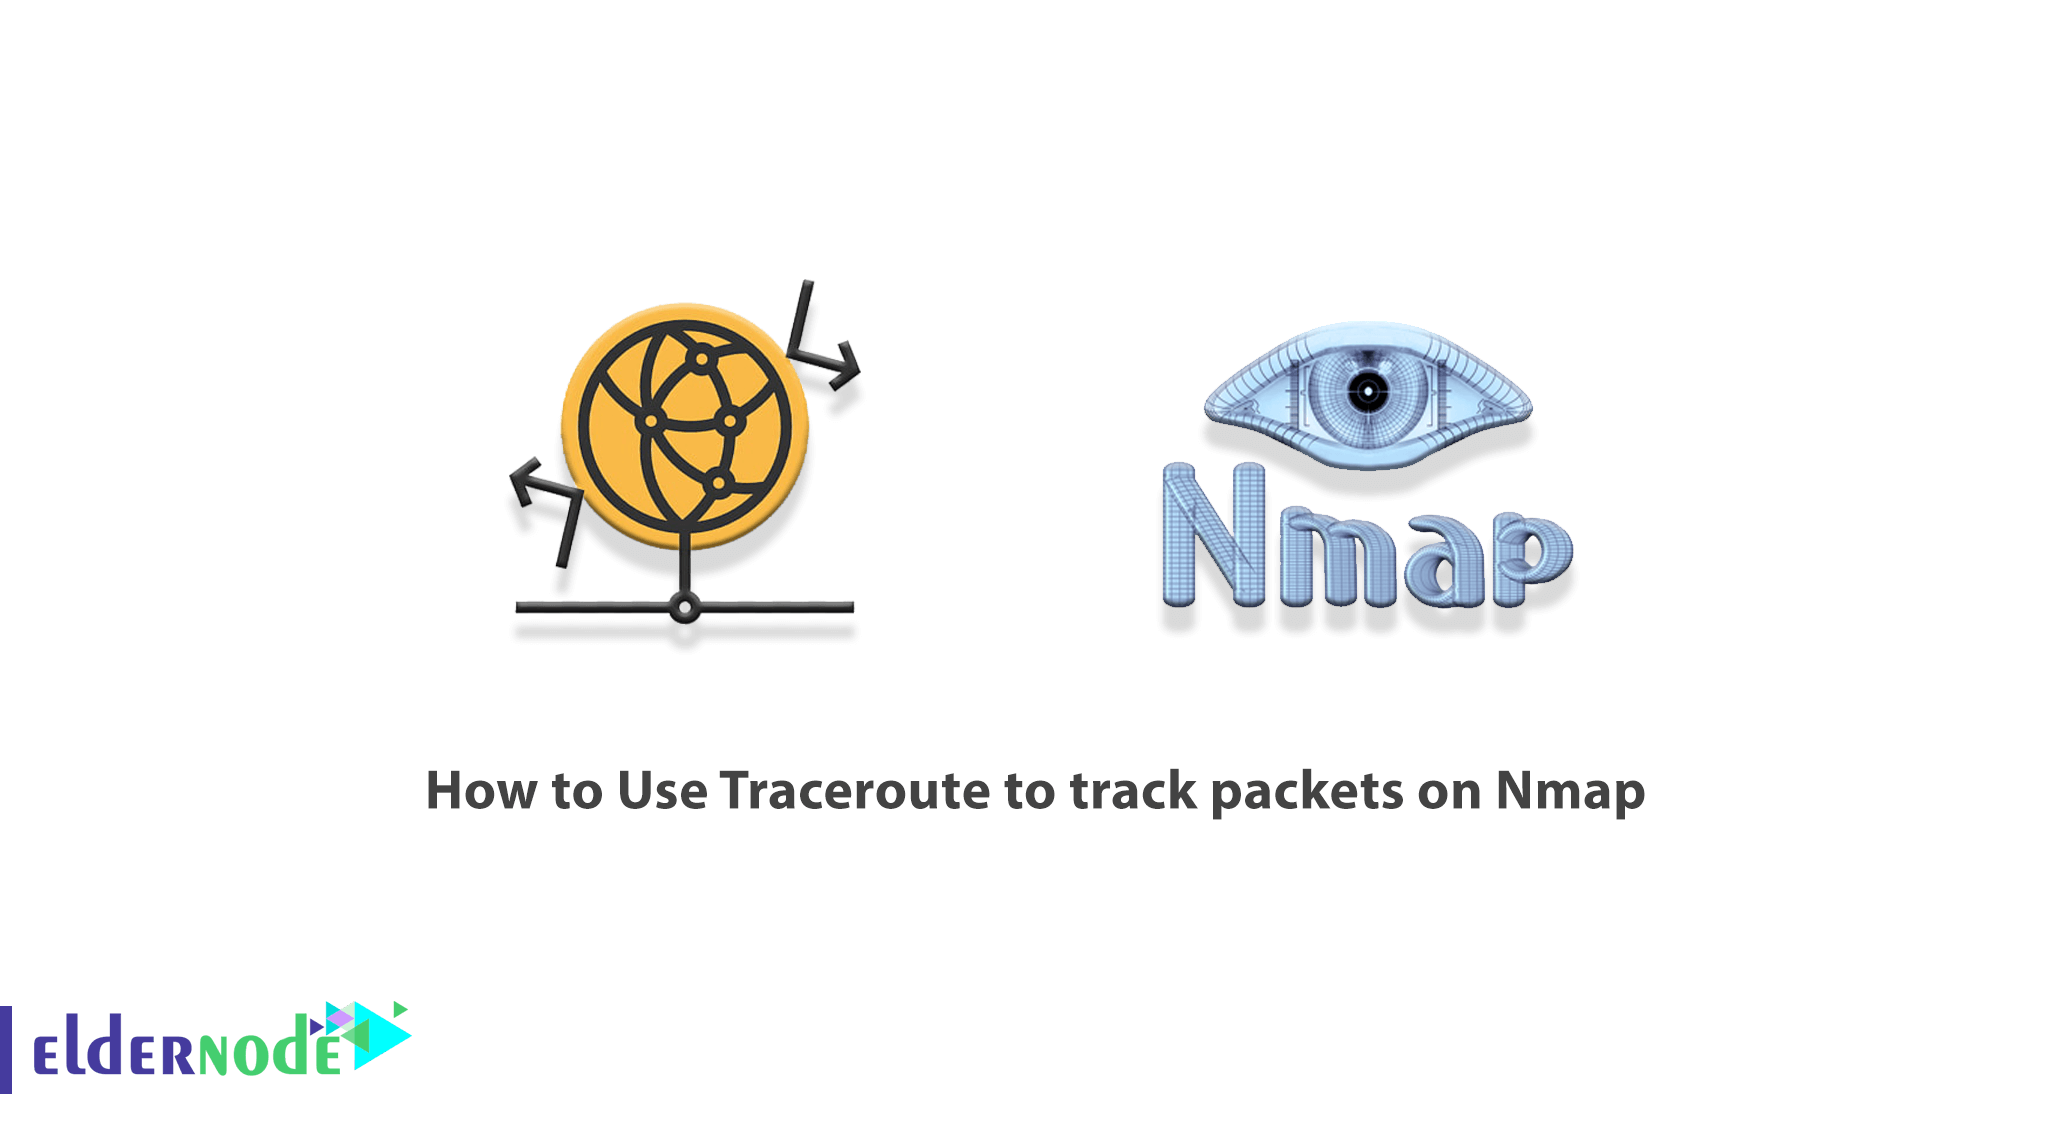 How to Use Traceroute to track packets on Nmap